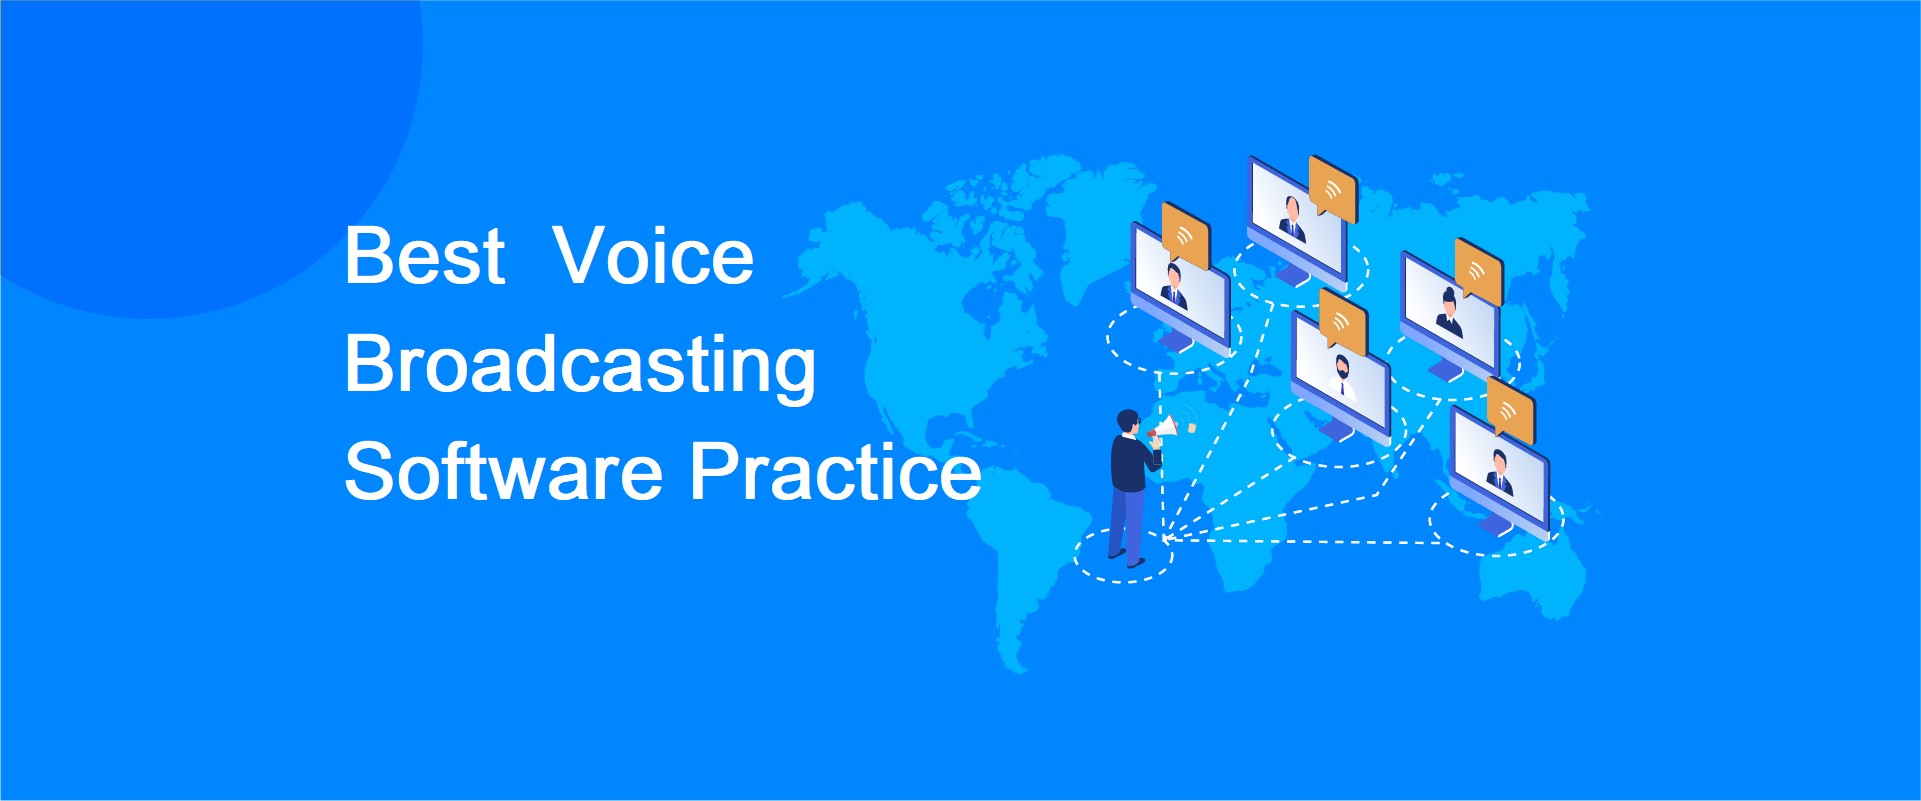 Best Voice Broadcasting Software